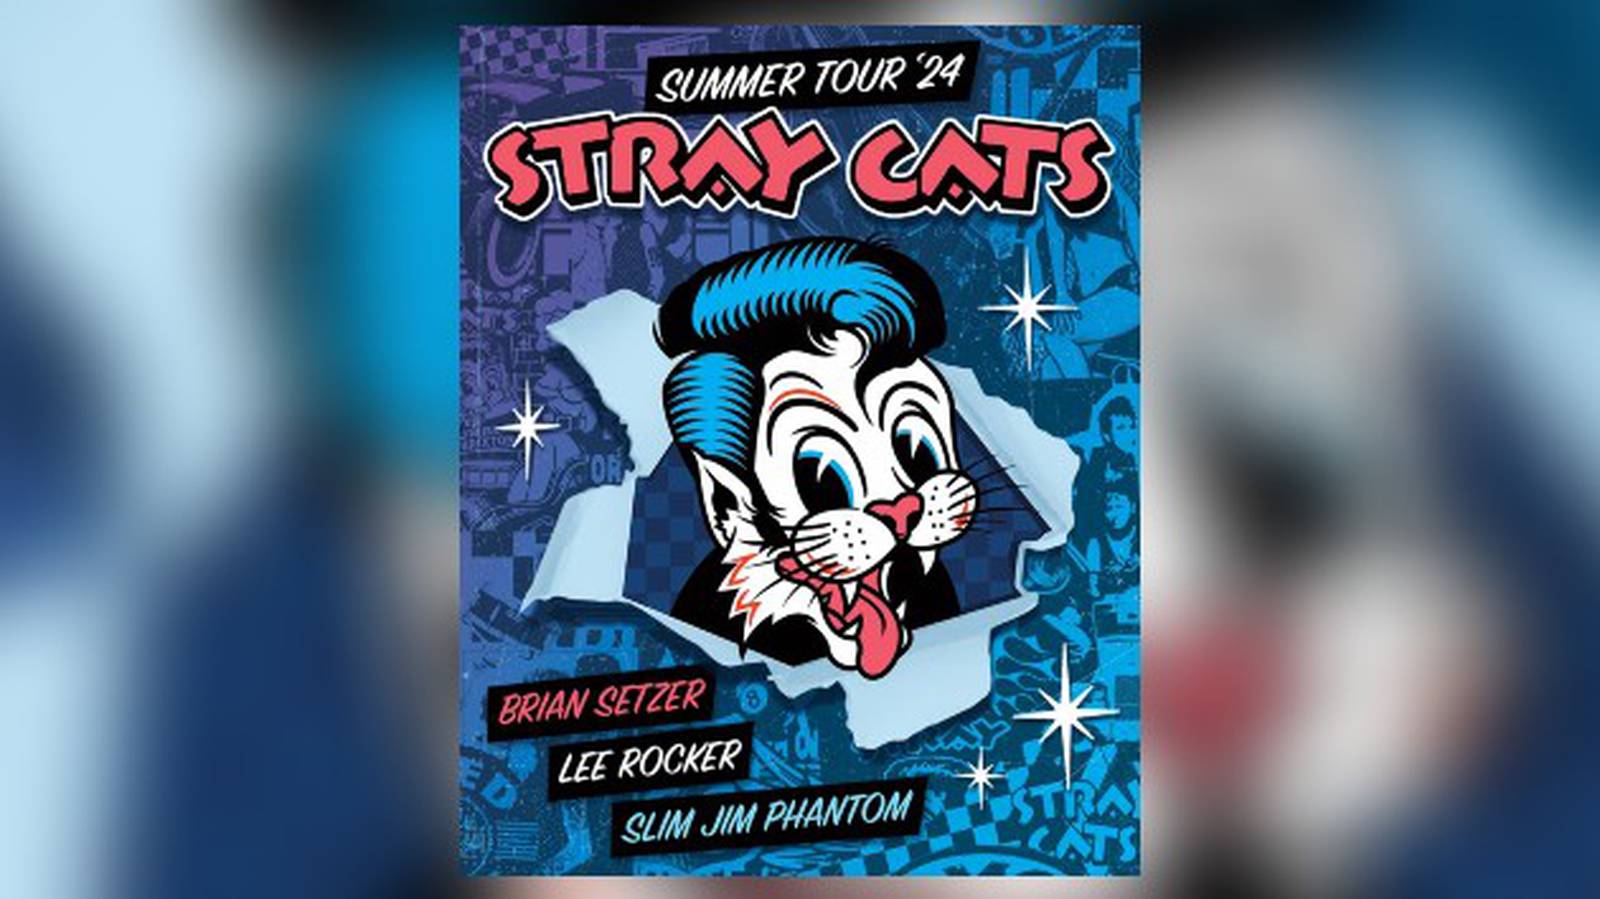 Stray Cats reuniting for first tour since 2019 102.3 WBAB